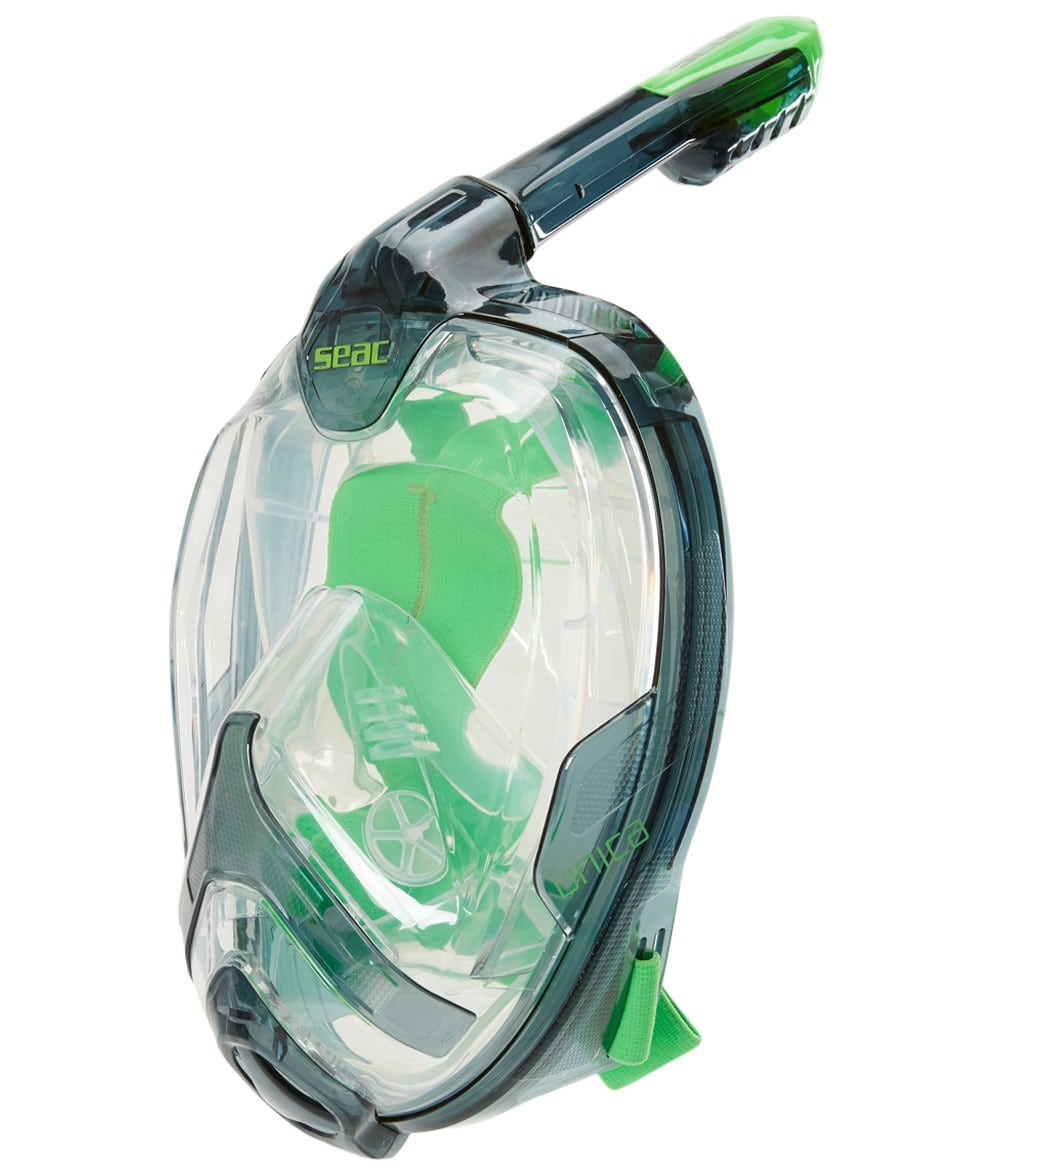 Seac Usa Unica Full Face Snorkeling Mask - Black/Lime S/M Size Small/Medium - Swimoutlet.com